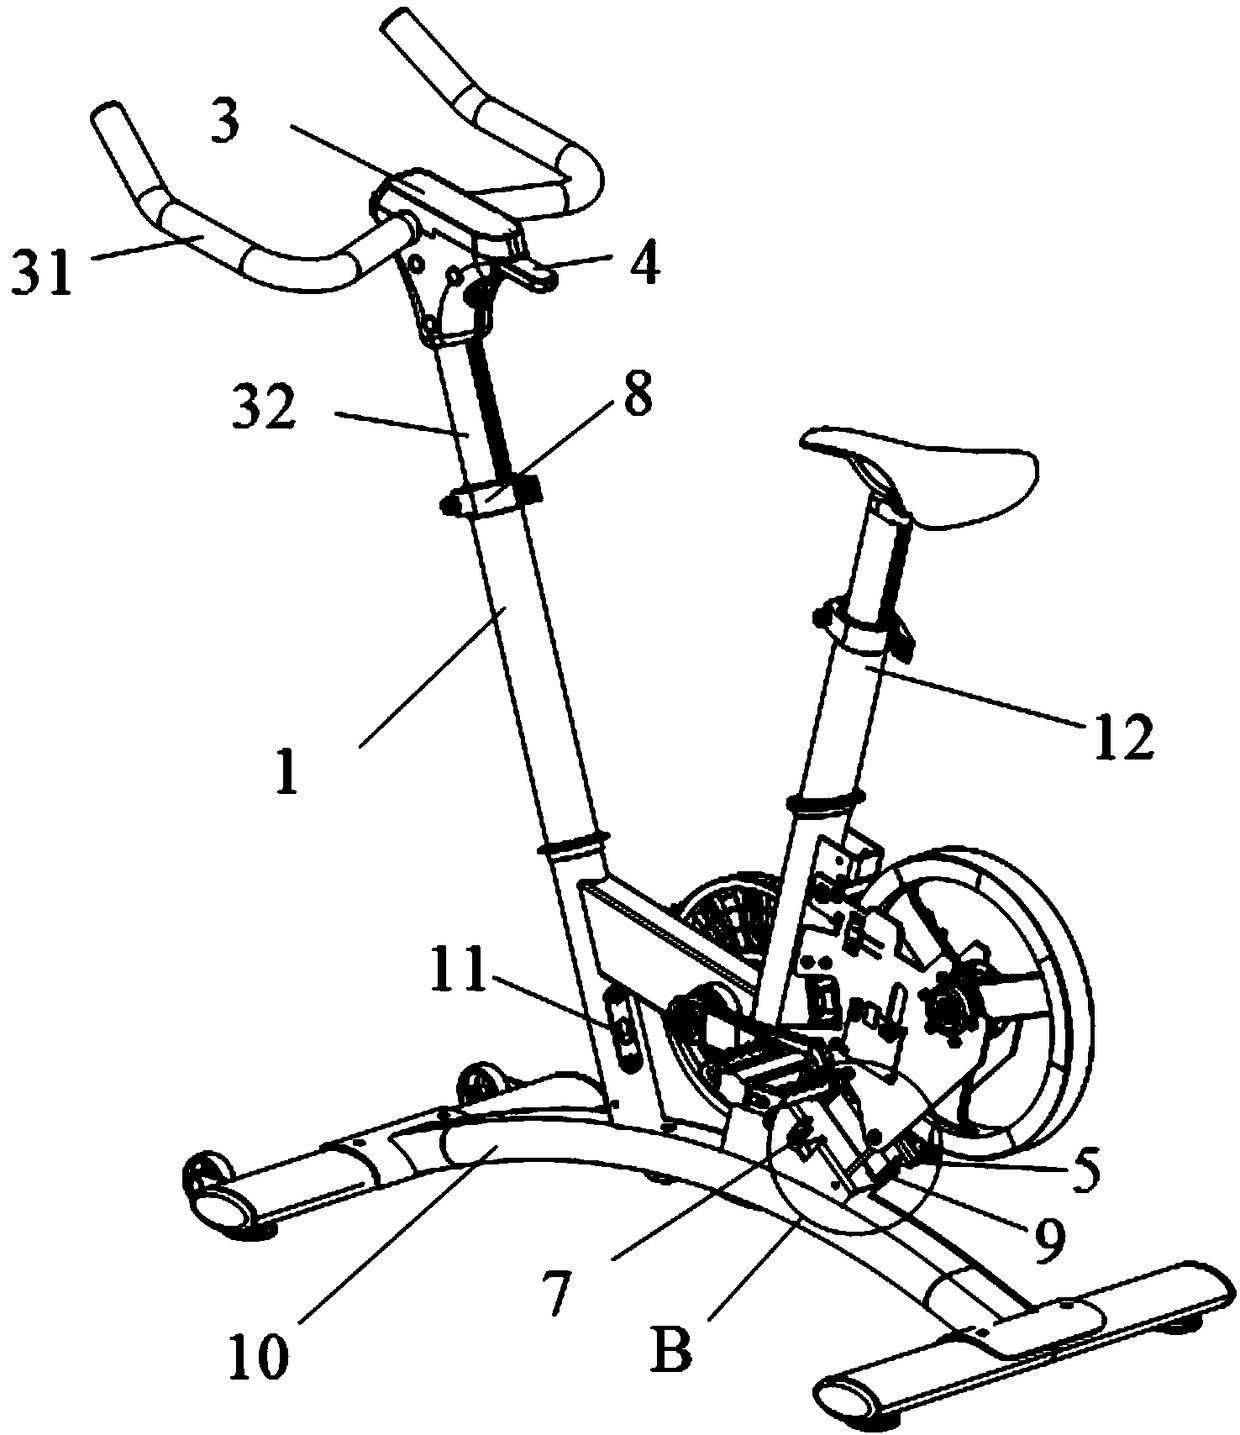 A brake device for an exercise bicycle